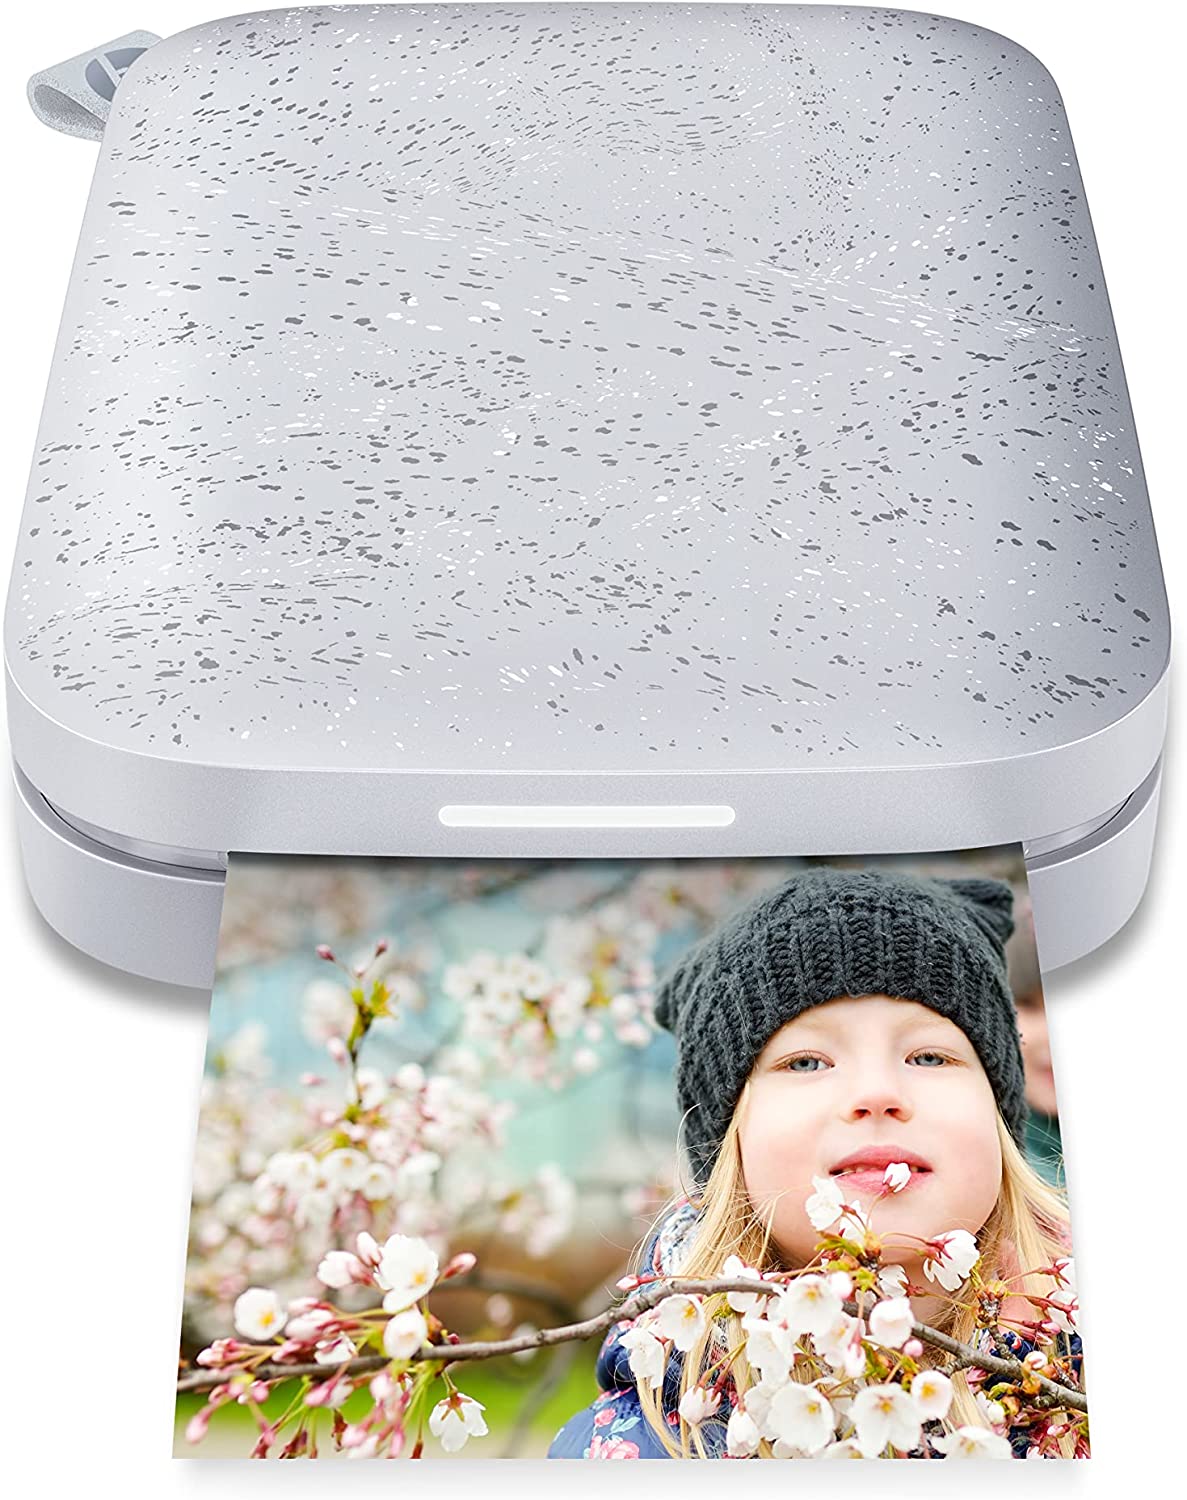 HP Sprocket Portable Printer, Zink Sticky Paper 2x3 Instant Photo Printer  for iOS & Android Device